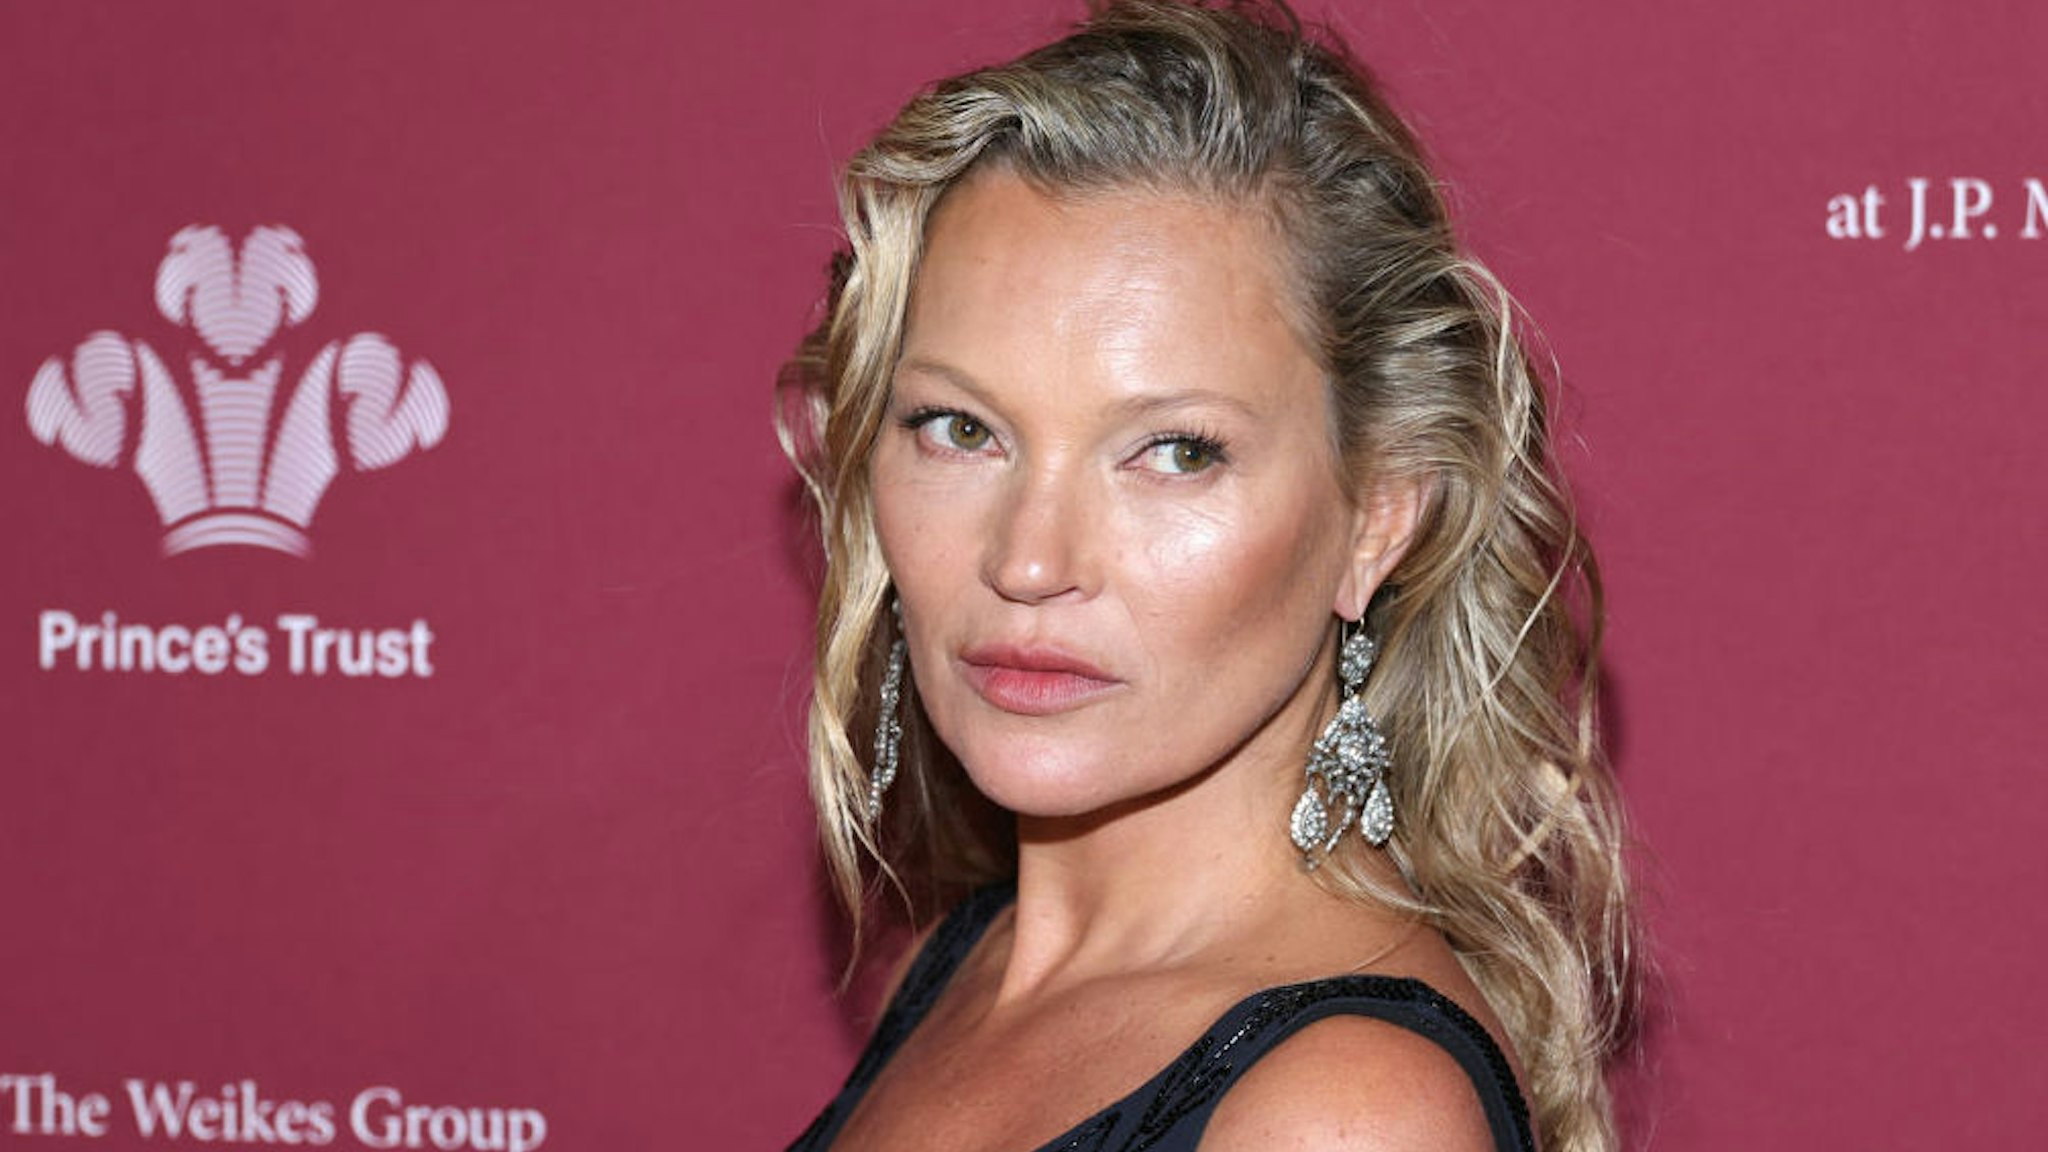 Kate Moss attends the 2022 Prince's Trust Gala at Cipriani 25 Broadway on April 28, 2022 in New York City.